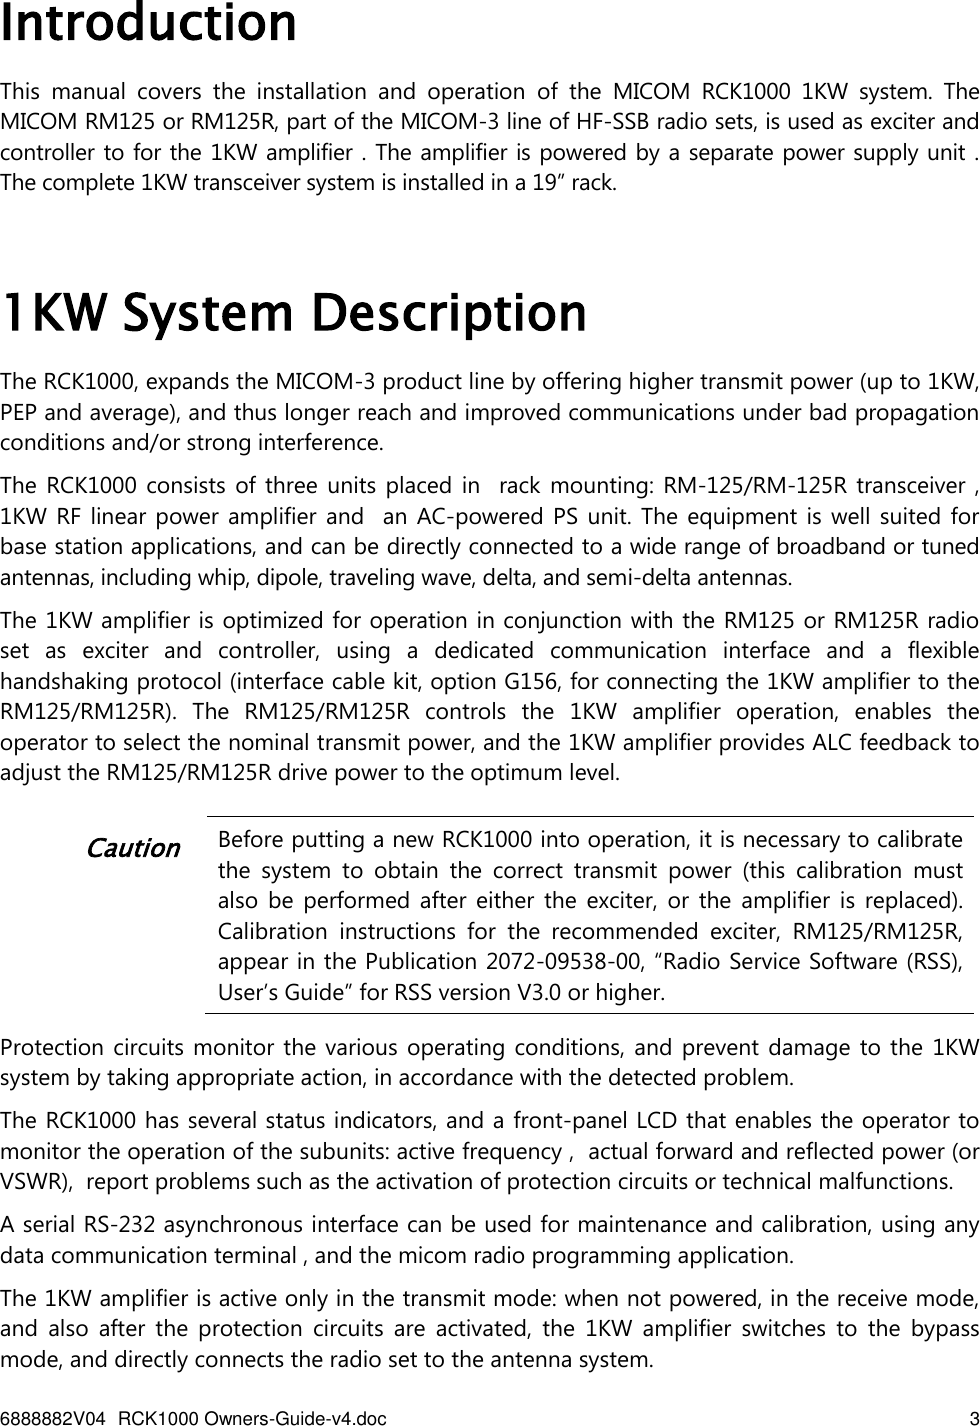 6888882V04 RCK1000 Owners-Guide-v4.doc    3   Introduction This  manual  covers  the  installation  and  operation  of  the  MICOM  RCK1000  1KW  system.  The MICOM RM125 or RM125R, part of the MICOM-3 line of HF-SSB radio sets, is used as exciter and controller to for the 1KW amplifier . The amplifier is powered by a separate power supply unit .  The complete 1KW transceiver system is installed in a 19” rack.    1KW System Description The RCK1000, expands the MICOM-3 product line by offering higher transmit power (up to 1KW, PEP and average), and thus longer reach and improved communications under bad propagation conditions and/or strong interference.  The RCK1000 consists  of three units  placed in   rack mounting:  RM-125/RM-125R transceiver ,     1KW RF  linear power amplifier and    an AC-powered PS  unit. The equipment is  well suited  for base station applications, and can be directly connected to a wide range of broadband or tuned antennas, including whip, dipole, traveling wave, delta, and semi-delta antennas. The 1KW amplifier is optimized for operation in conjunction with the RM125 or RM125R radio set  as  exciter  and  controller,  using  a  dedicated  communication  interface  and  a  flexible handshaking protocol (interface cable kit, option G156, for connecting the 1KW amplifier to the RM125/RM125R).  The  RM125/RM125R  controls  the  1KW  amplifier  operation,  enables  the operator to select the nominal transmit power, and the 1KW amplifier provides ALC feedback to adjust the RM125/RM125R drive power to the optimum level.   Caution Before putting a new RCK1000 into operation, it is necessary to calibrate the  system  to  obtain  the  correct  transmit  power  (this  calibration  must also  be  performed after  either  the  exciter,  or  the  amplifier  is  replaced). Calibration  instructions  for  the  recommended  exciter,  RM125/RM125R, appear in the Publication 2072-09538-00, “Radio Service Software (RSS), User’s Guide” for RSS version V3.0 or higher.  Protection circuits monitor the various operating conditions, and prevent damage to the  1KW system by taking appropriate action, in accordance with the detected problem. The RCK1000 has several status indicators, and a front-panel LCD that enables the operator to monitor the operation of the subunits: active frequency ,  actual forward and reflected power (or VSWR),  report problems such as the activation of protection circuits or technical malfunctions.  A serial RS-232 asynchronous interface can be used for maintenance and calibration, using any data communication terminal , and the micom radio programming application. The 1KW amplifier is active only in the transmit mode: when not powered, in the receive mode, and  also  after  the  protection  circuits  are  activated,  the  1KW  amplifier  switches  to  the  bypass mode, and directly connects the radio set to the antenna system. 